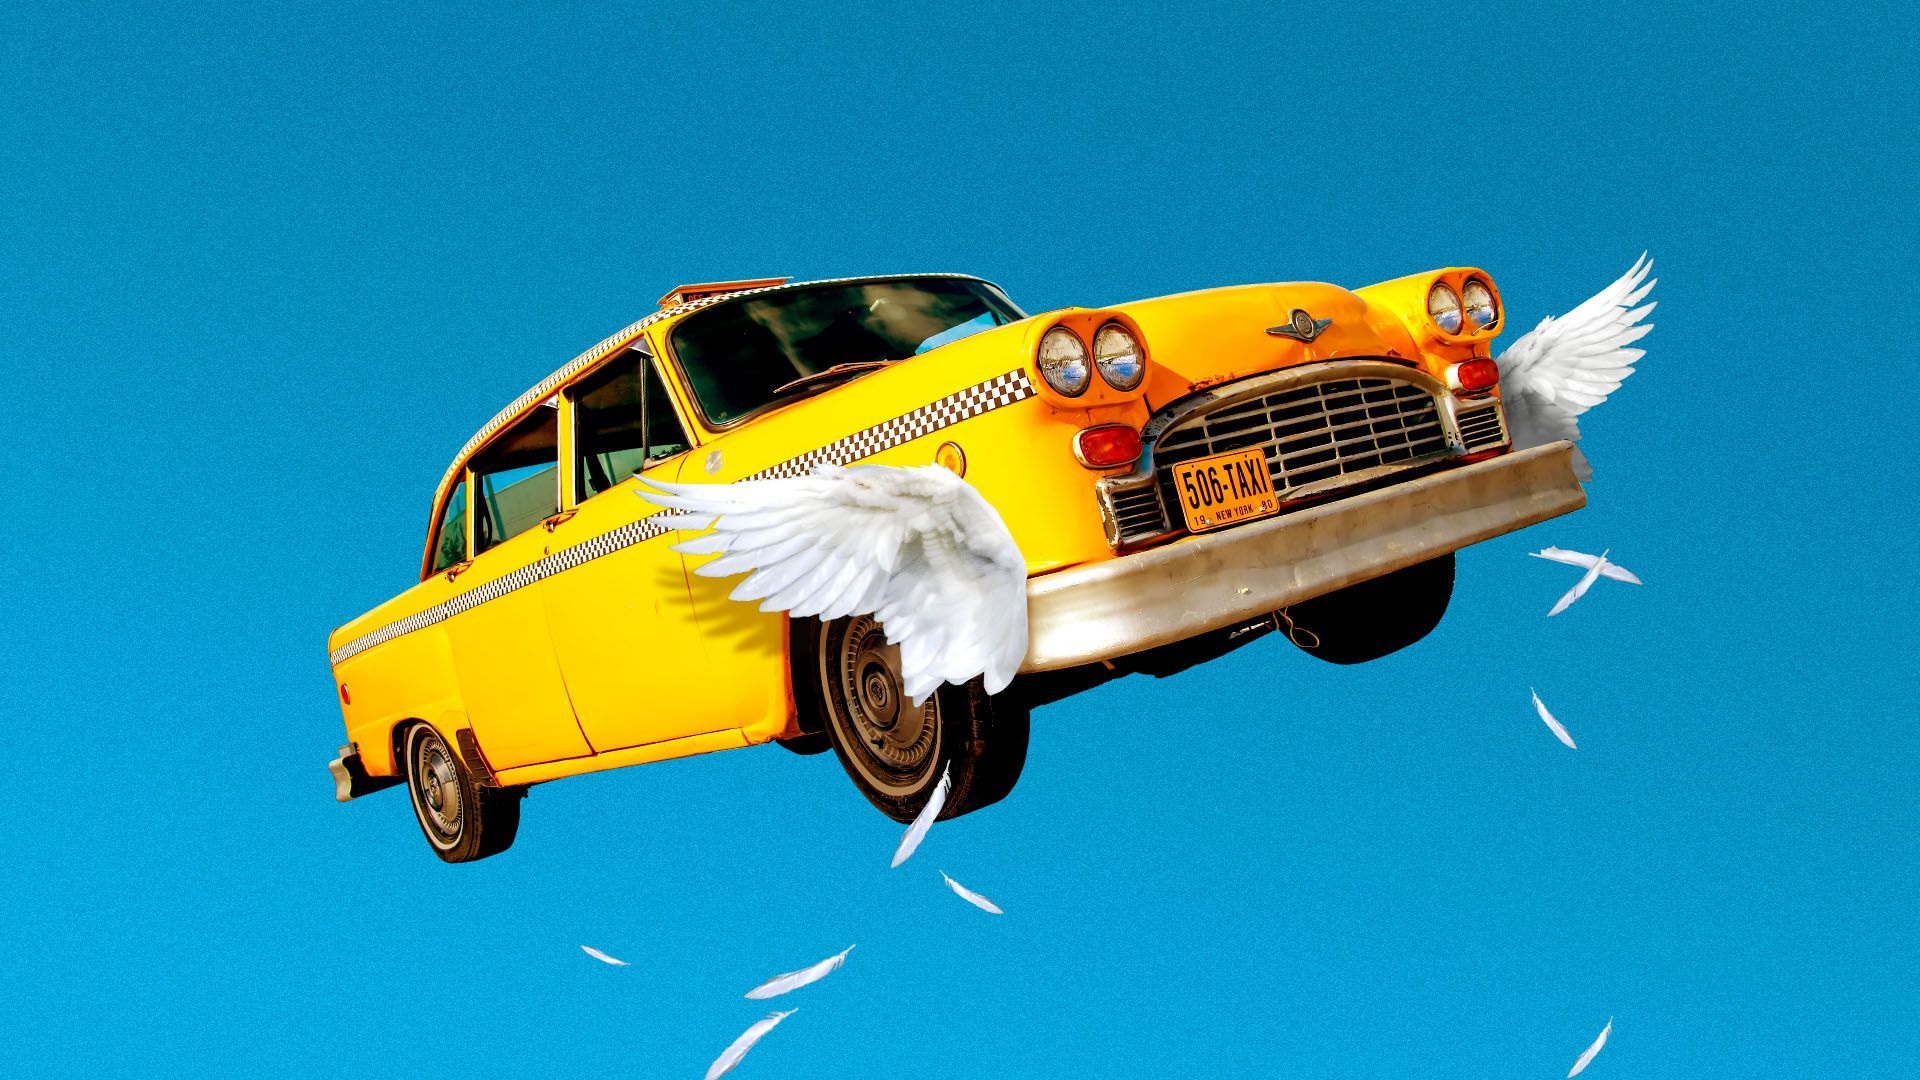 Illustration of a taxi in the sky with small molting wings